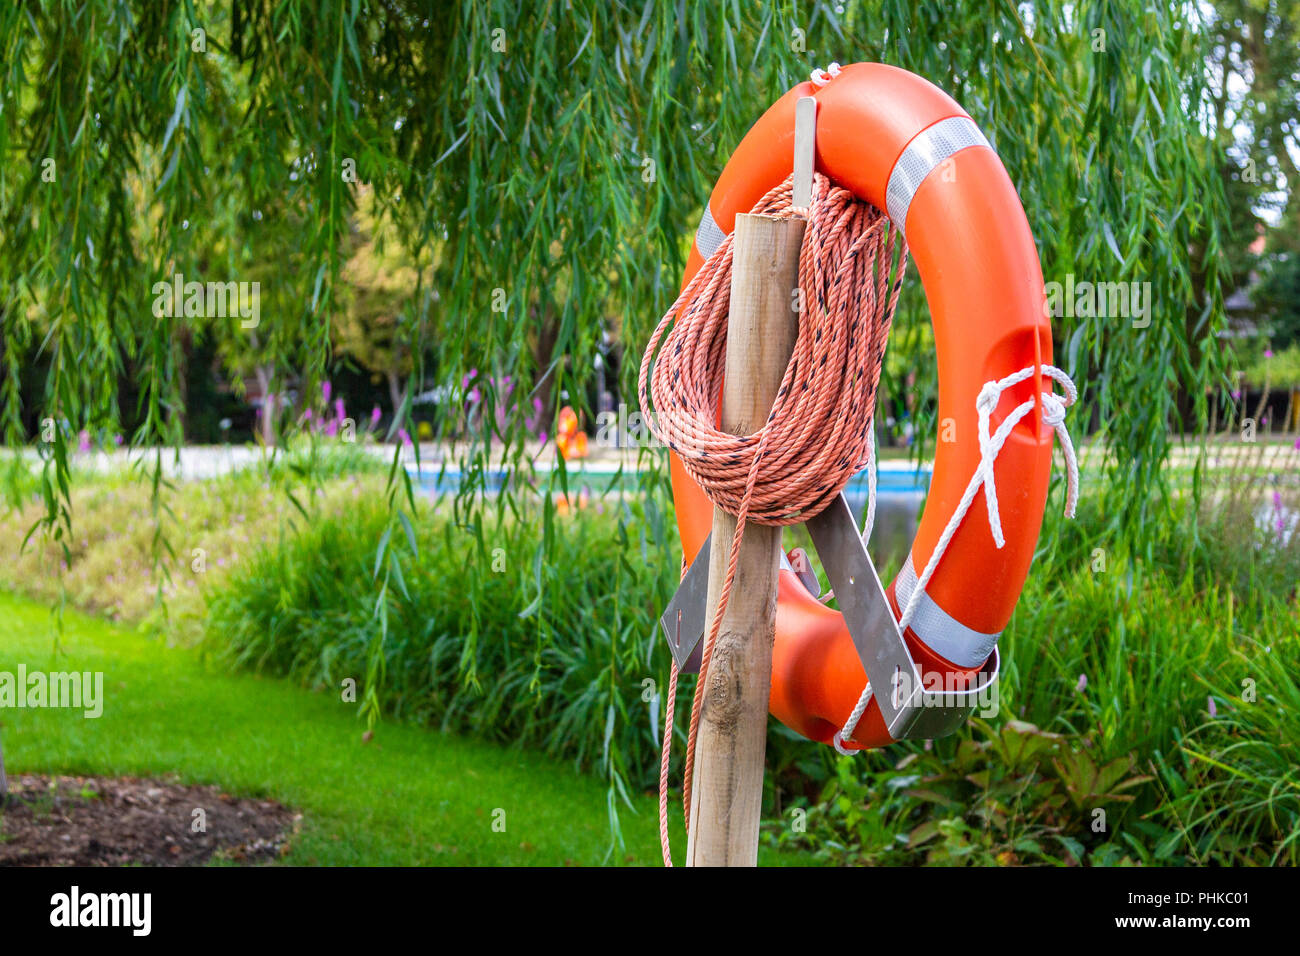 A rescue lifebelt in front of the lake Stock Photo